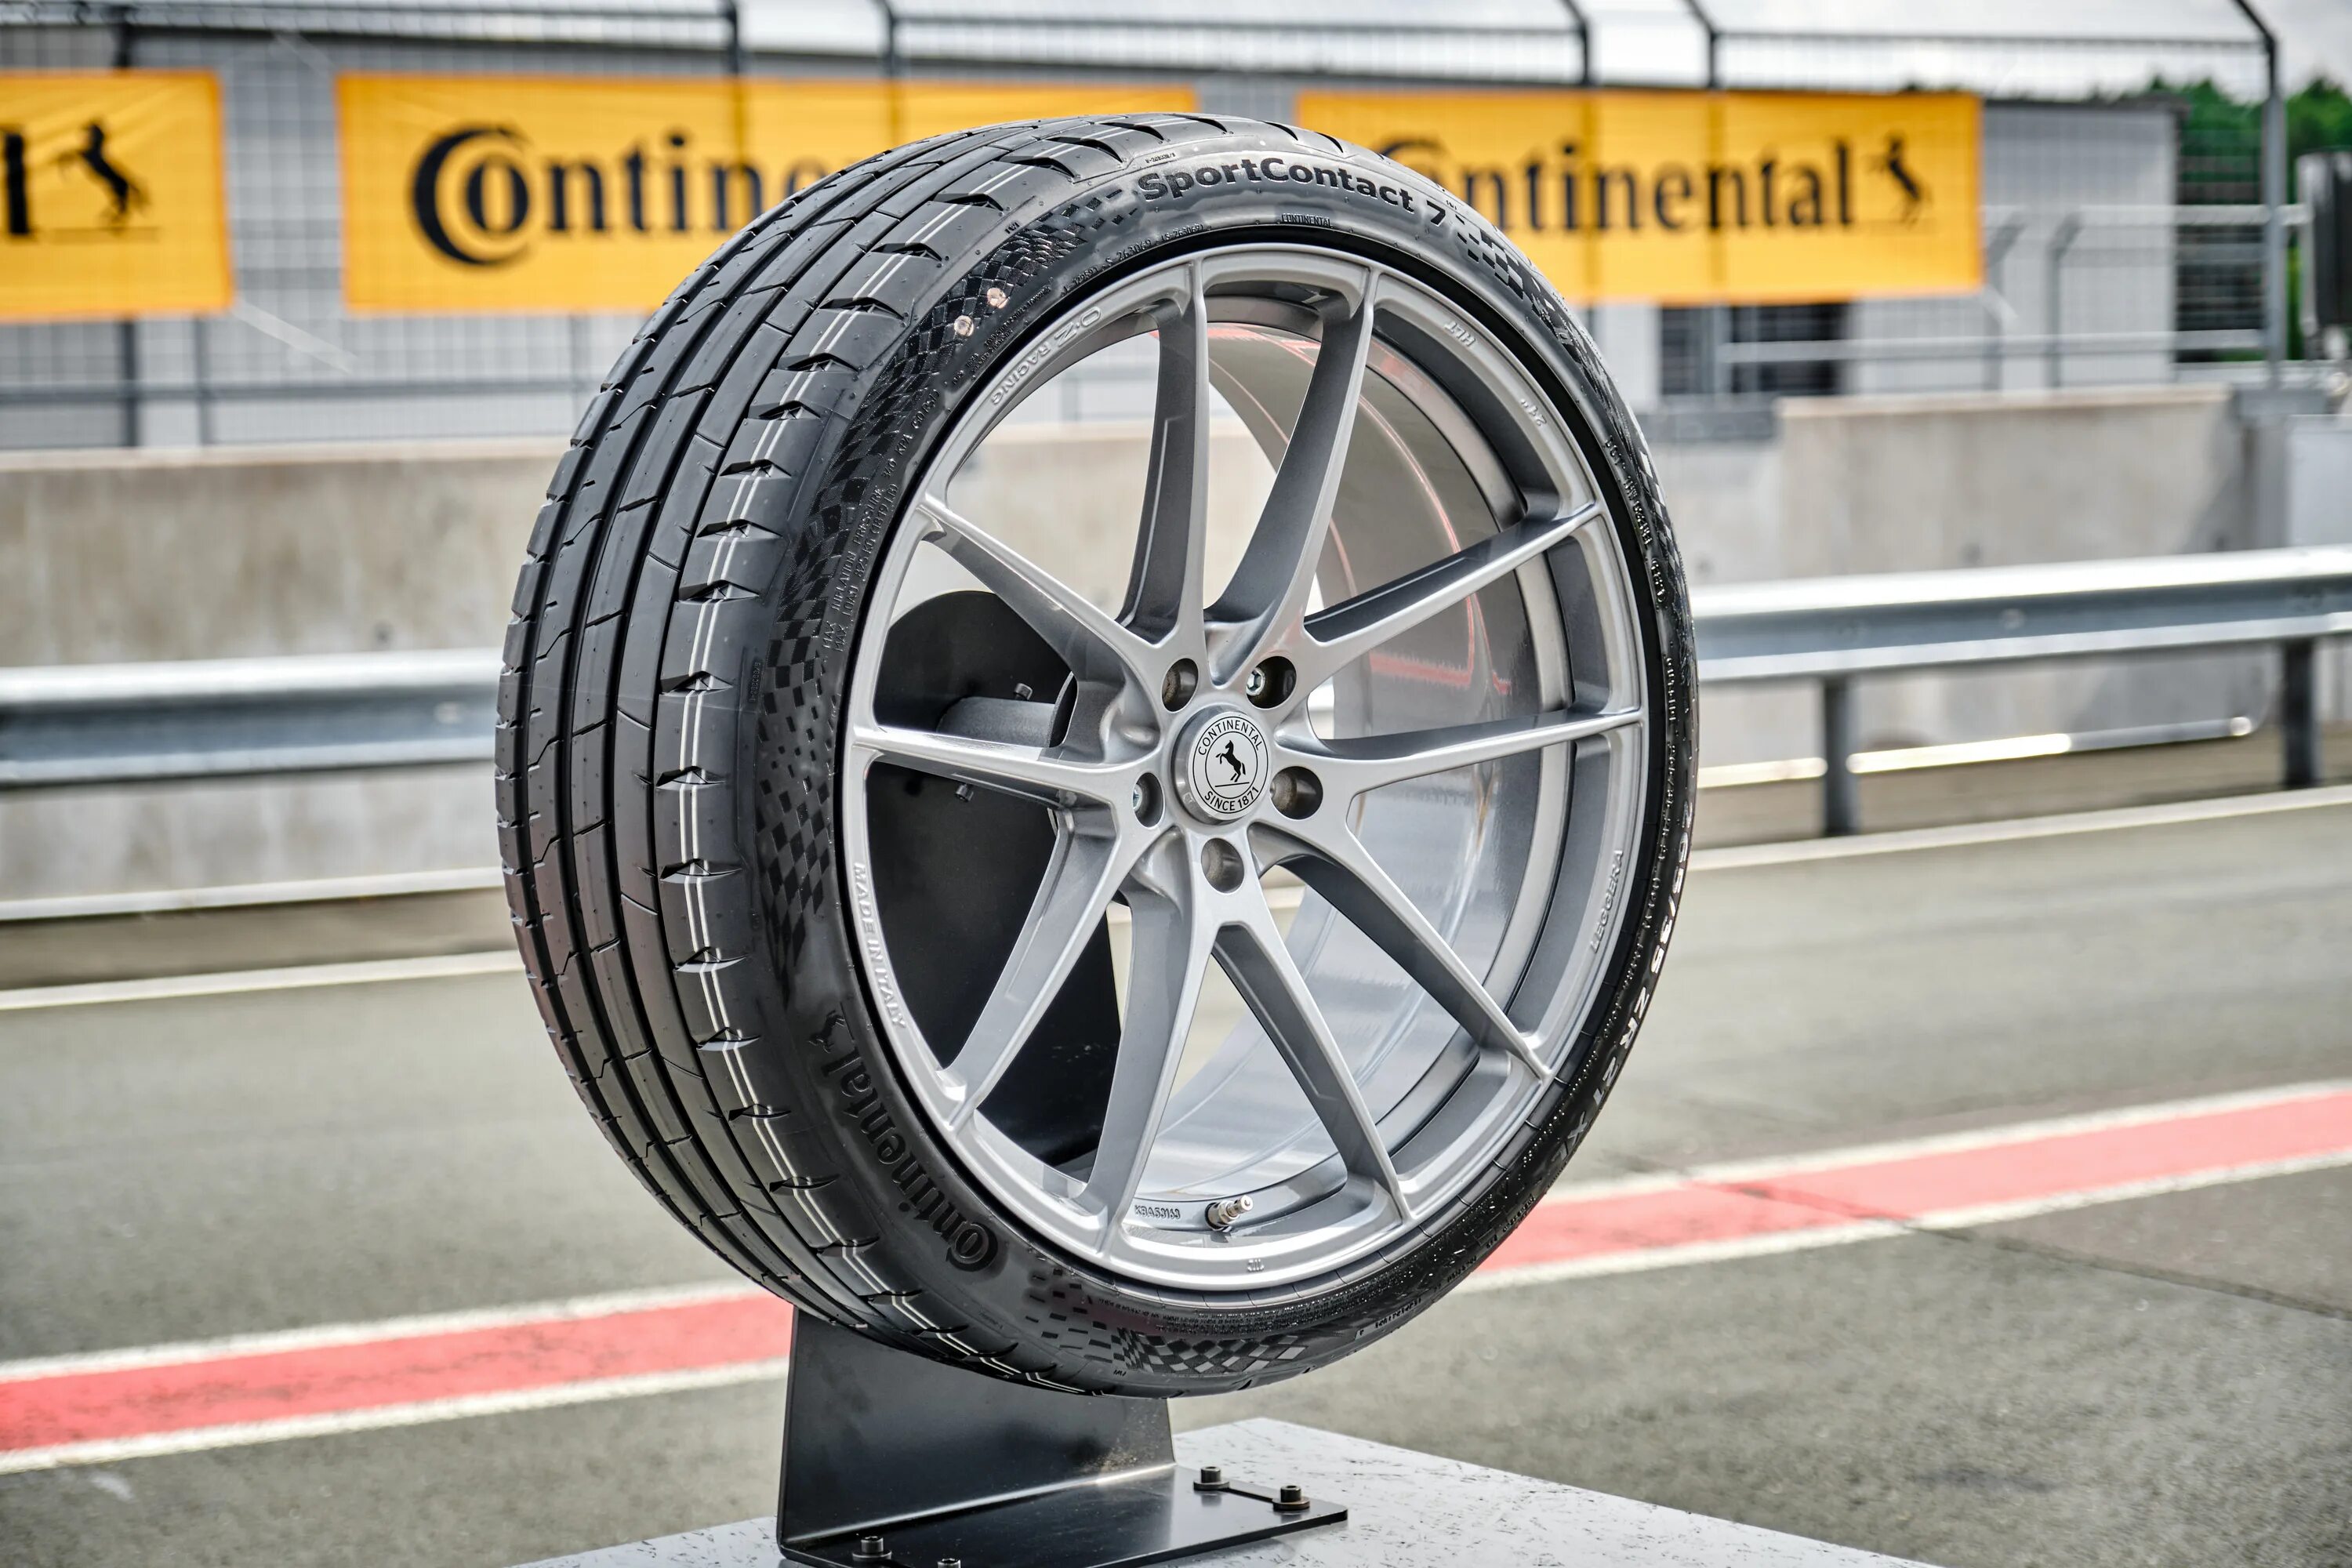 Continental SPORTCONTACT 7. Continental SPORTCONTACT 7 275 40 22. Continental SPORTCONTACT 6 225 40 255 35. 275/40 R22 Continental SPORTCONTACT 7 107y XL fr. Continental conti sport